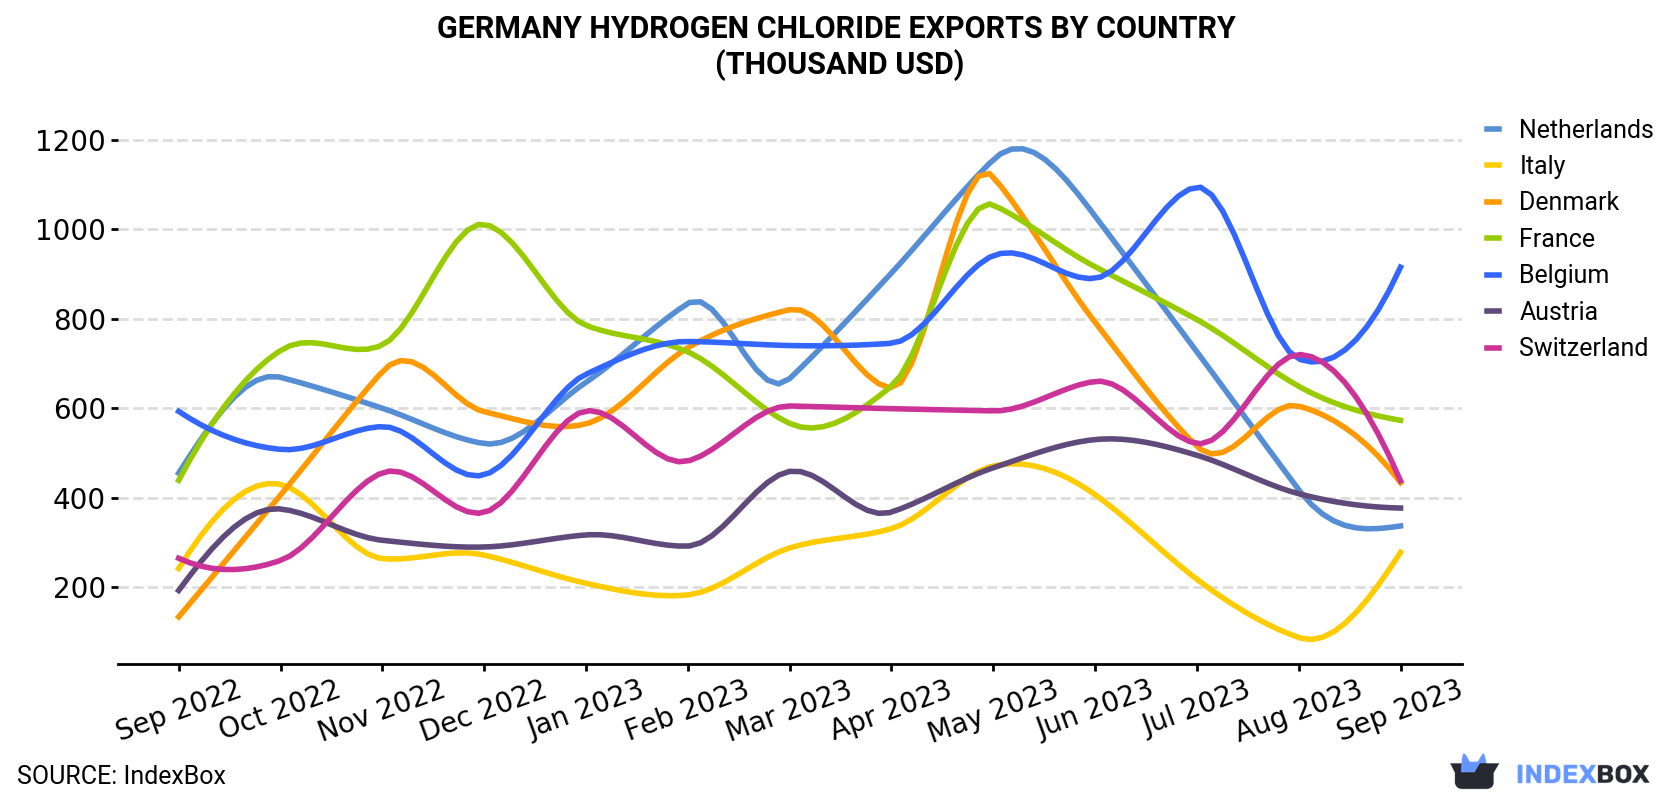 Germany Hydrogen Chloride Exports By Country (Thousand USD)